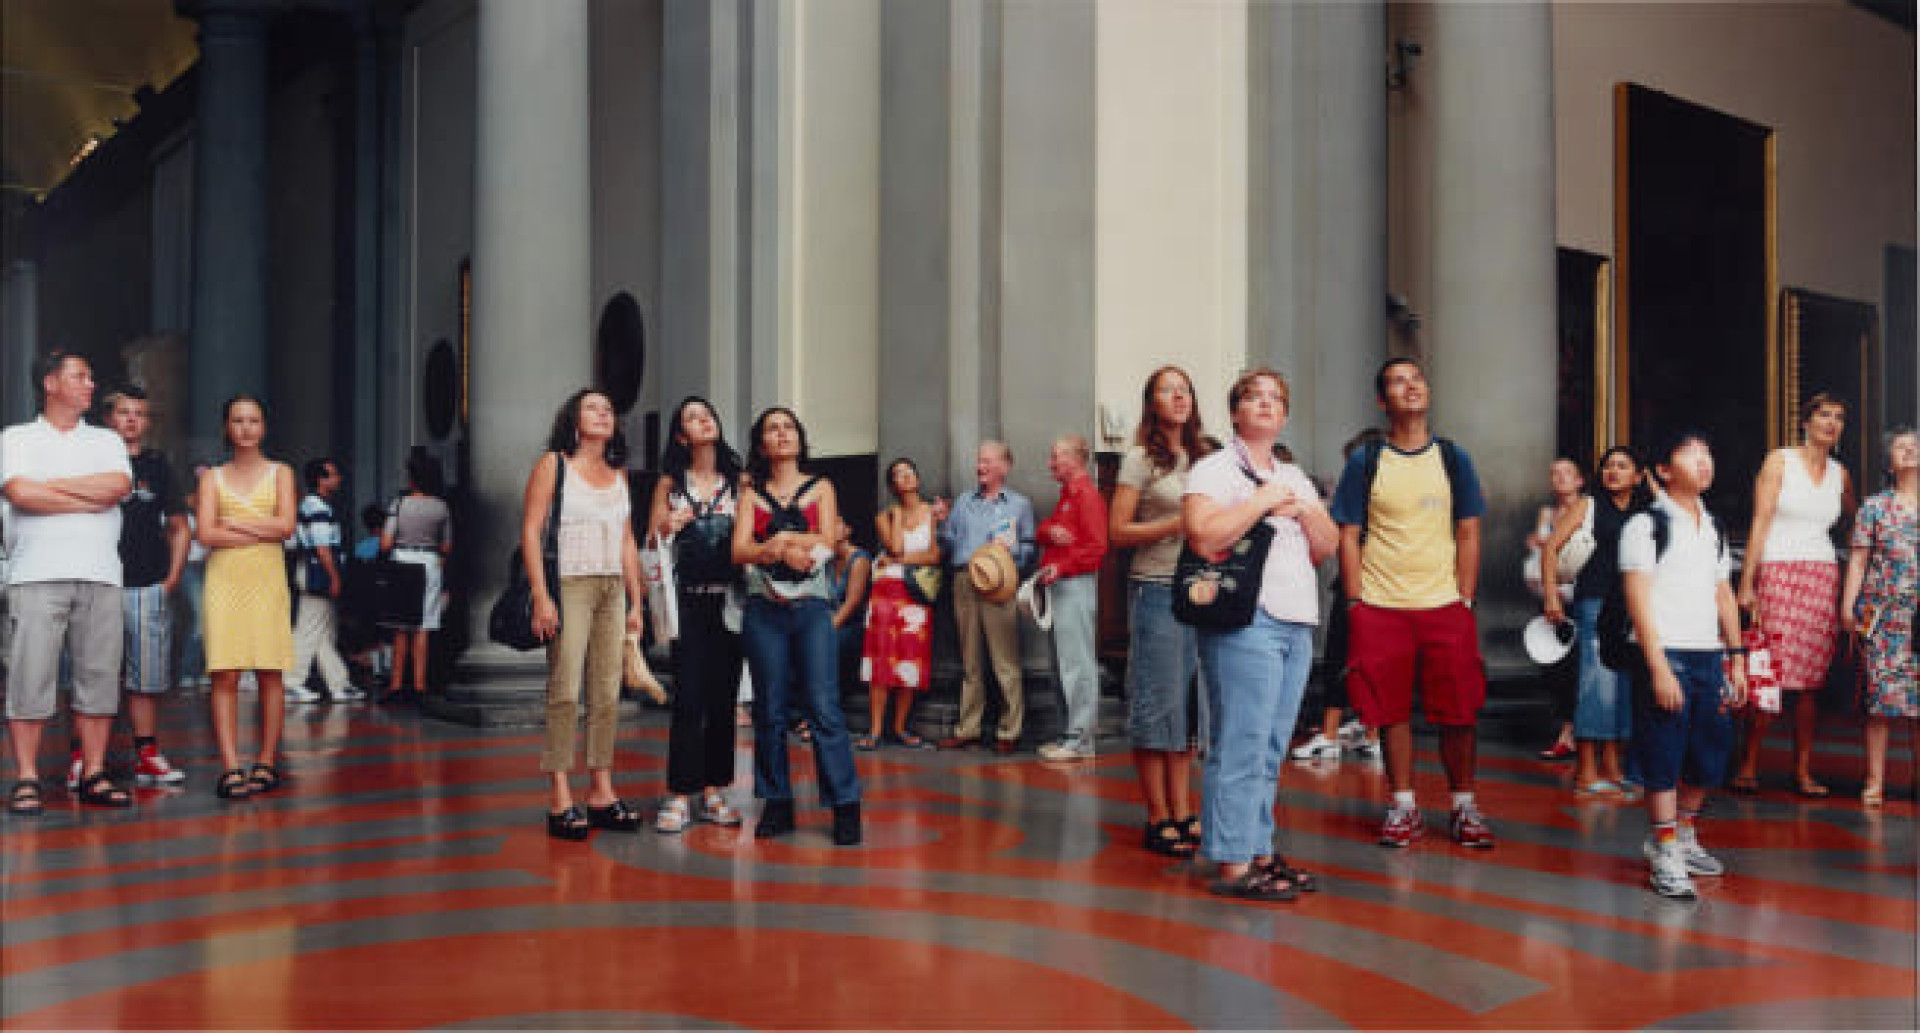 Thomas Struth, Audience 4 (Galleria dell' Academia – Florence), 2004 @MACAM